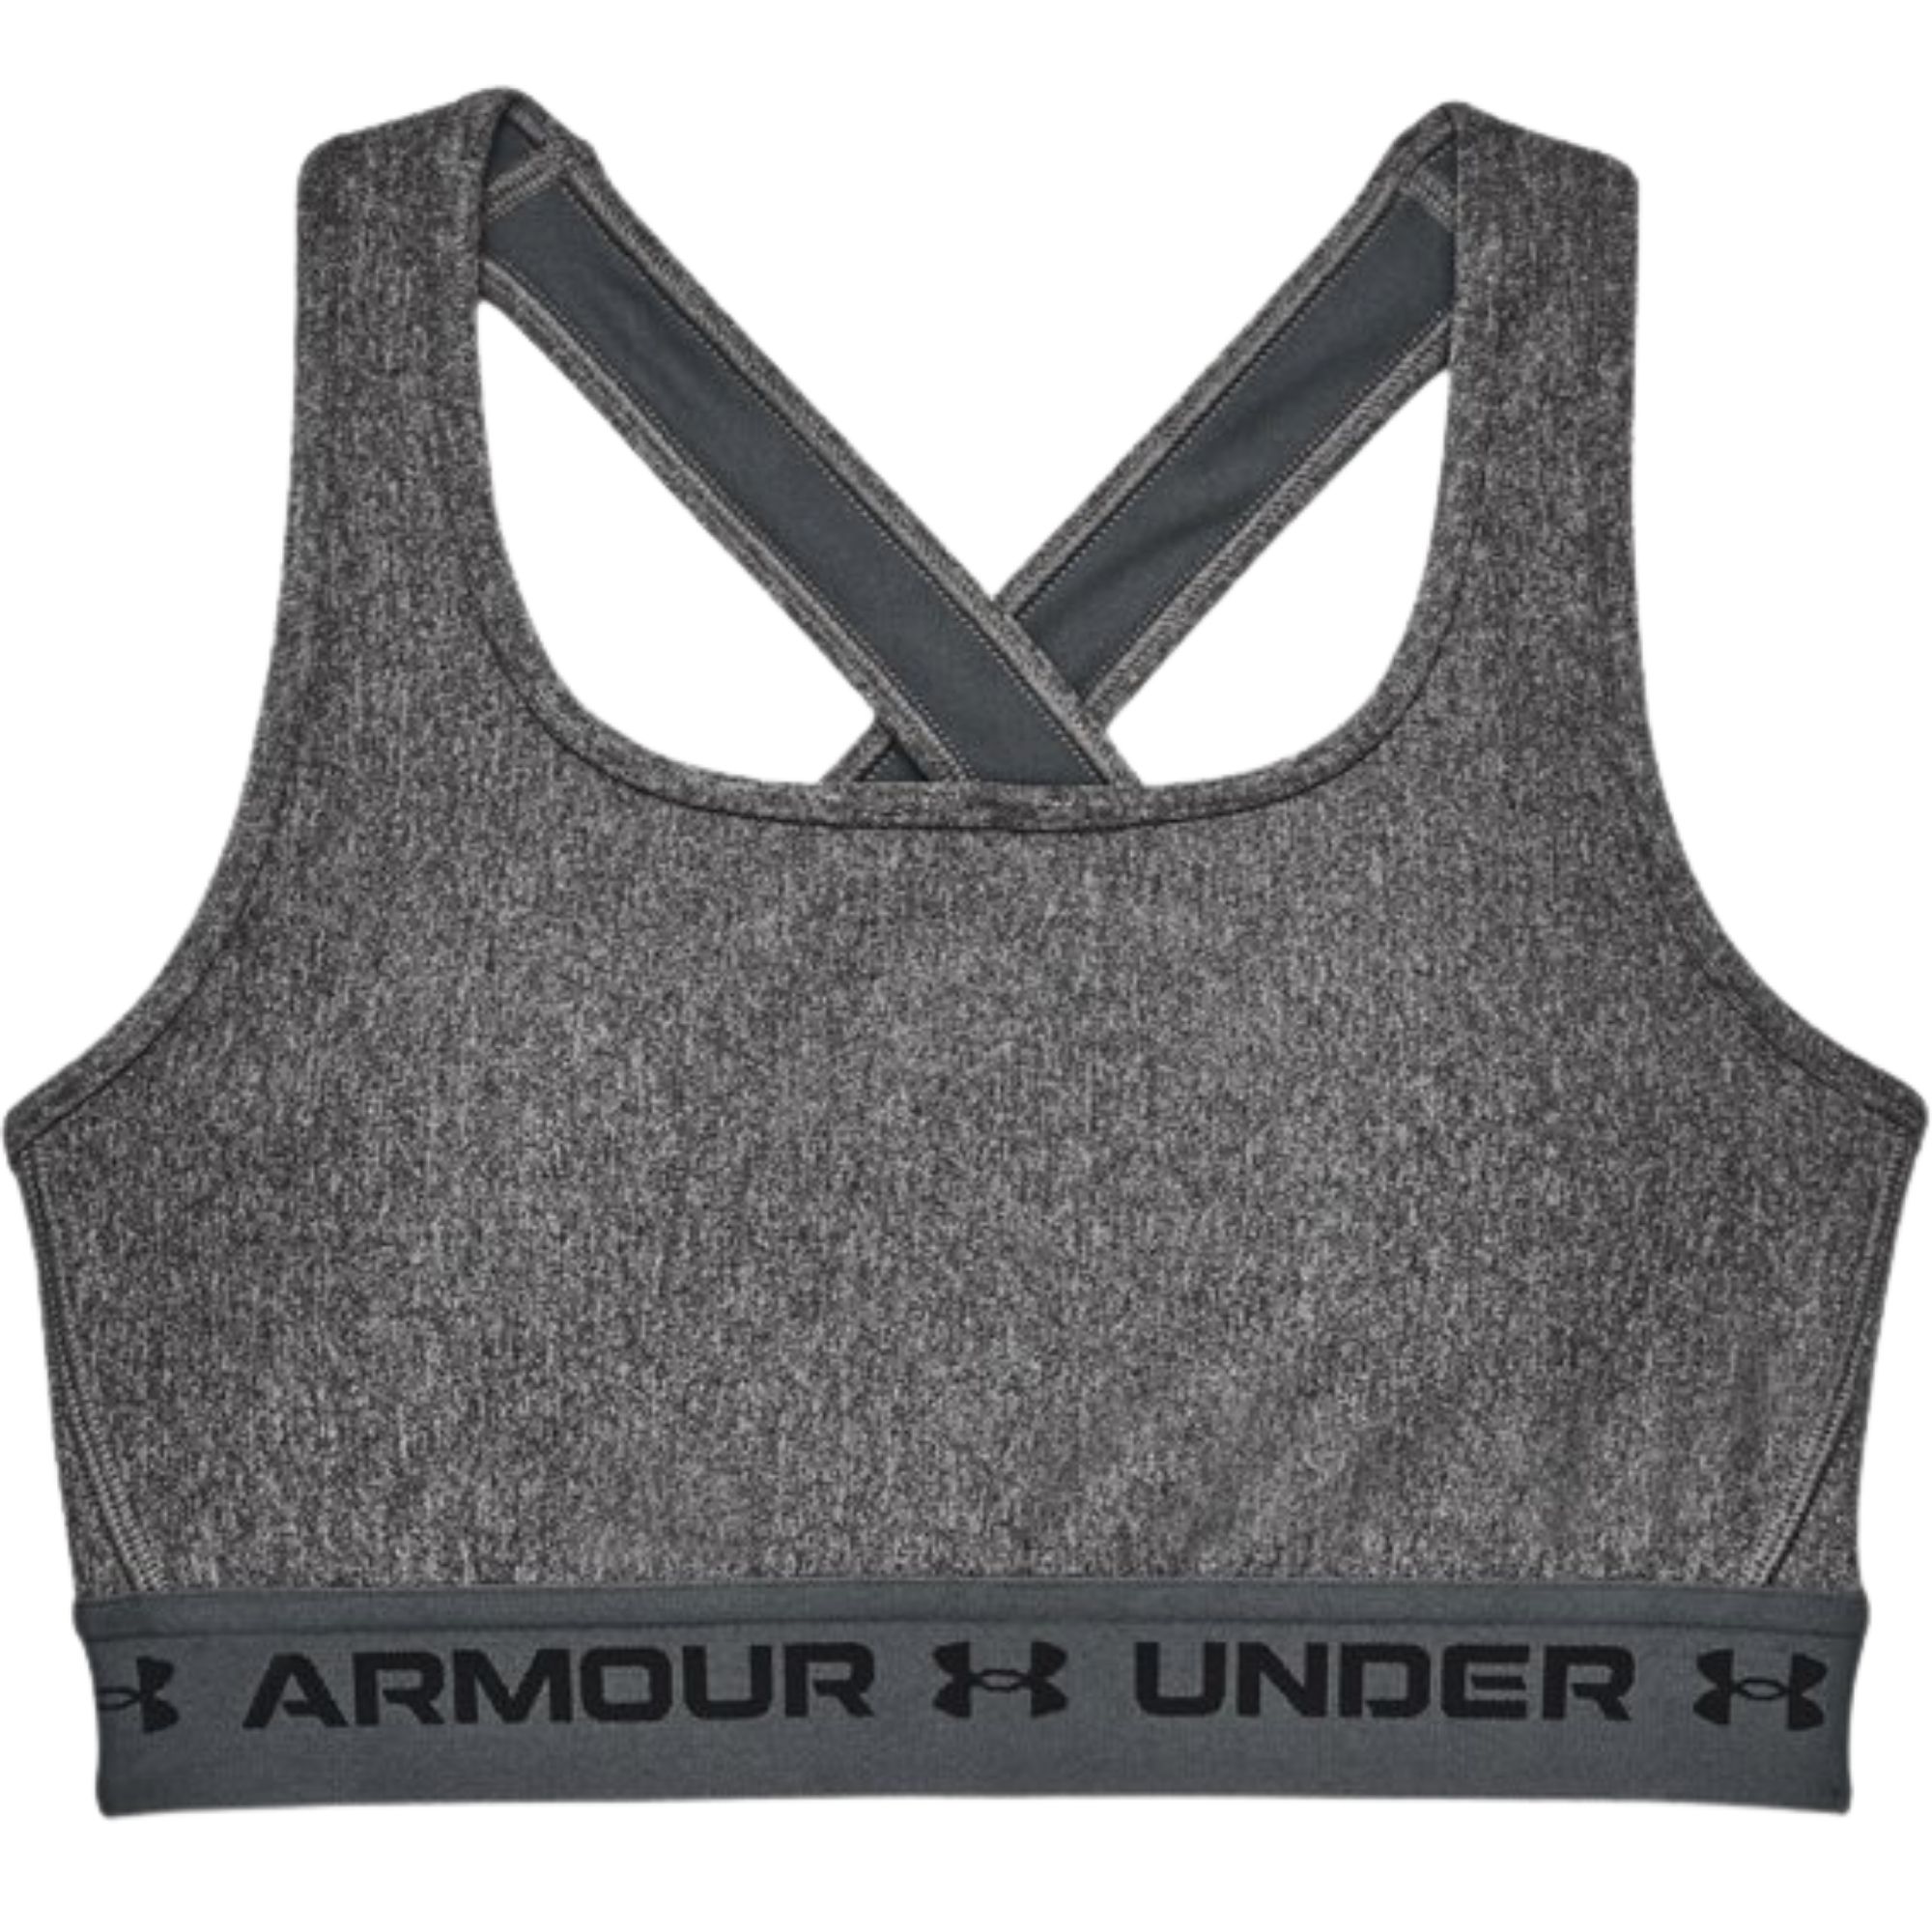 Under Armour UPLIFT - High support sports bra - halo gray/grey